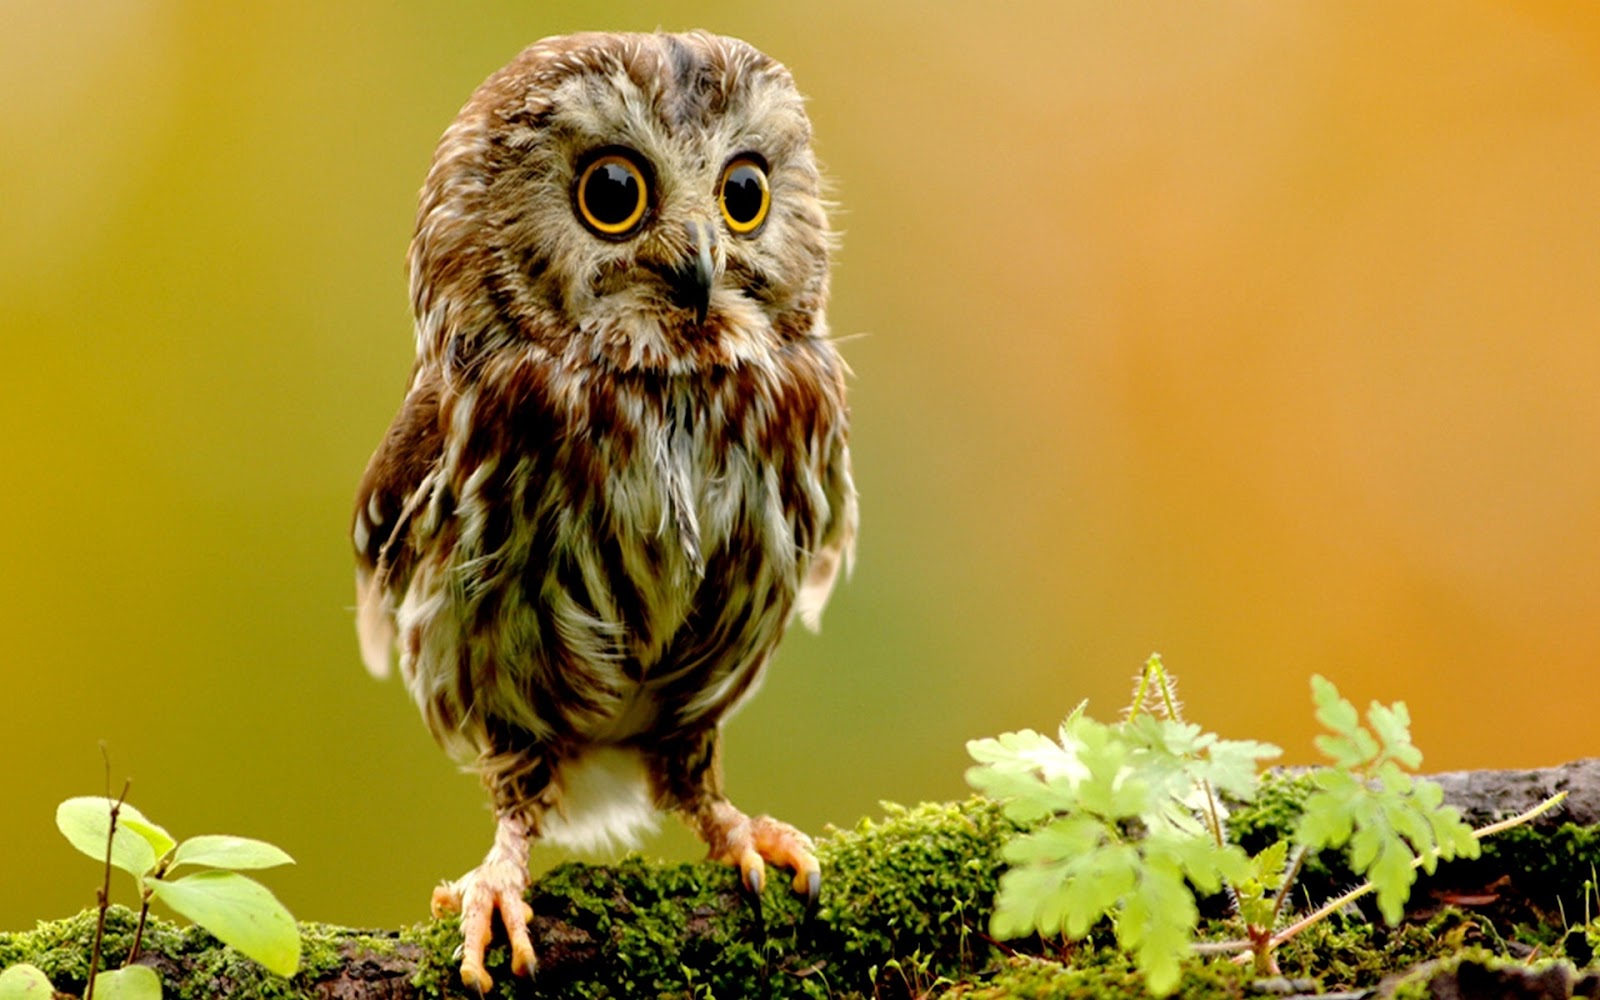 Owl Wallpapers | Fun Animals Wiki, Videos, Pictures, Stories